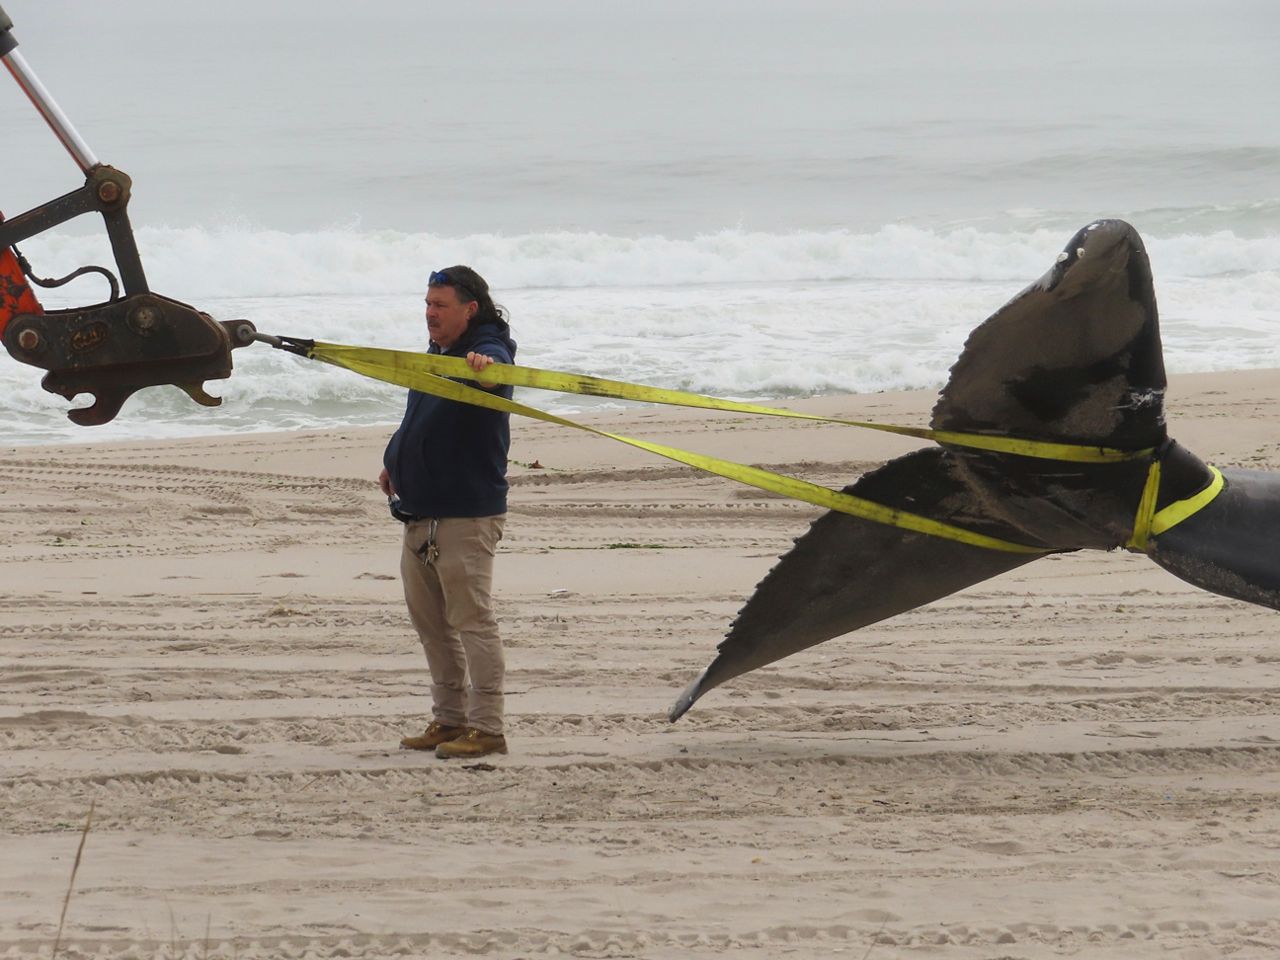 A worker secures the tail of a dead whale that washed ashore in Seaside Park N.J. on March 2, 2023. New Jersey officials say a wide array of research and preventive measures are either under way or planned soon to protect marine mammals during the construction and operation of offshore wind farms. Some people blame offshore wind preparation for a spate of whale deaths on the U.S. East Coast this winter, but three federal science agencies say there is no evidence linking the deaths to offshore wind preparation. (AP Photo/Wayne Parry)